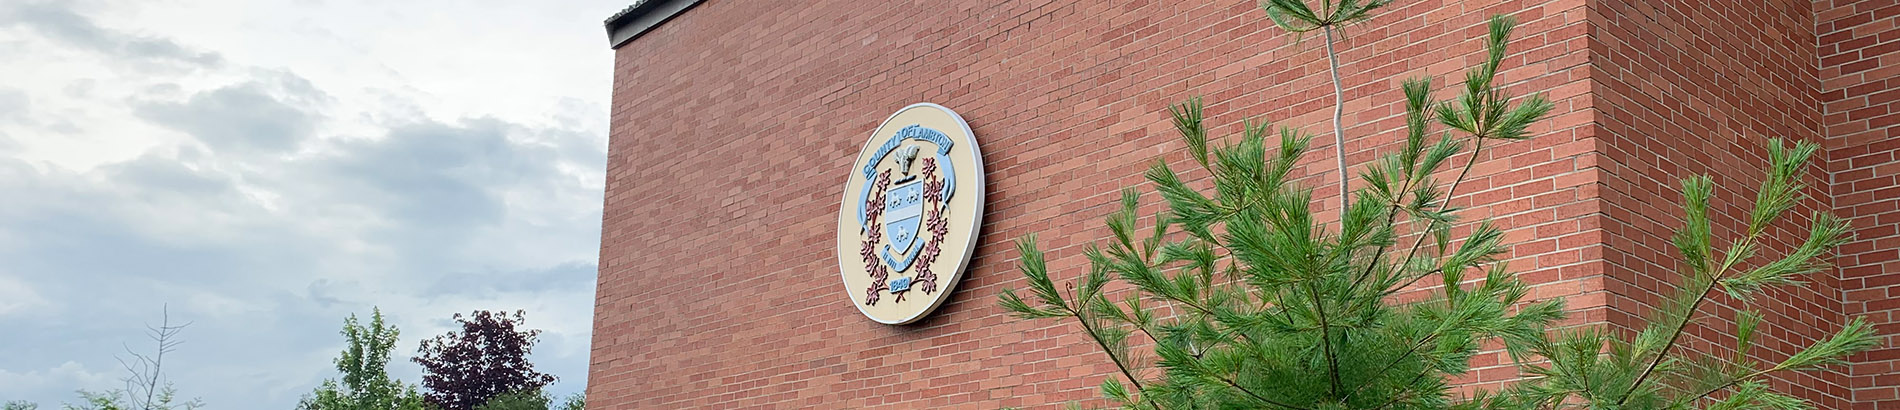 County Crest on the front of the Administration Building